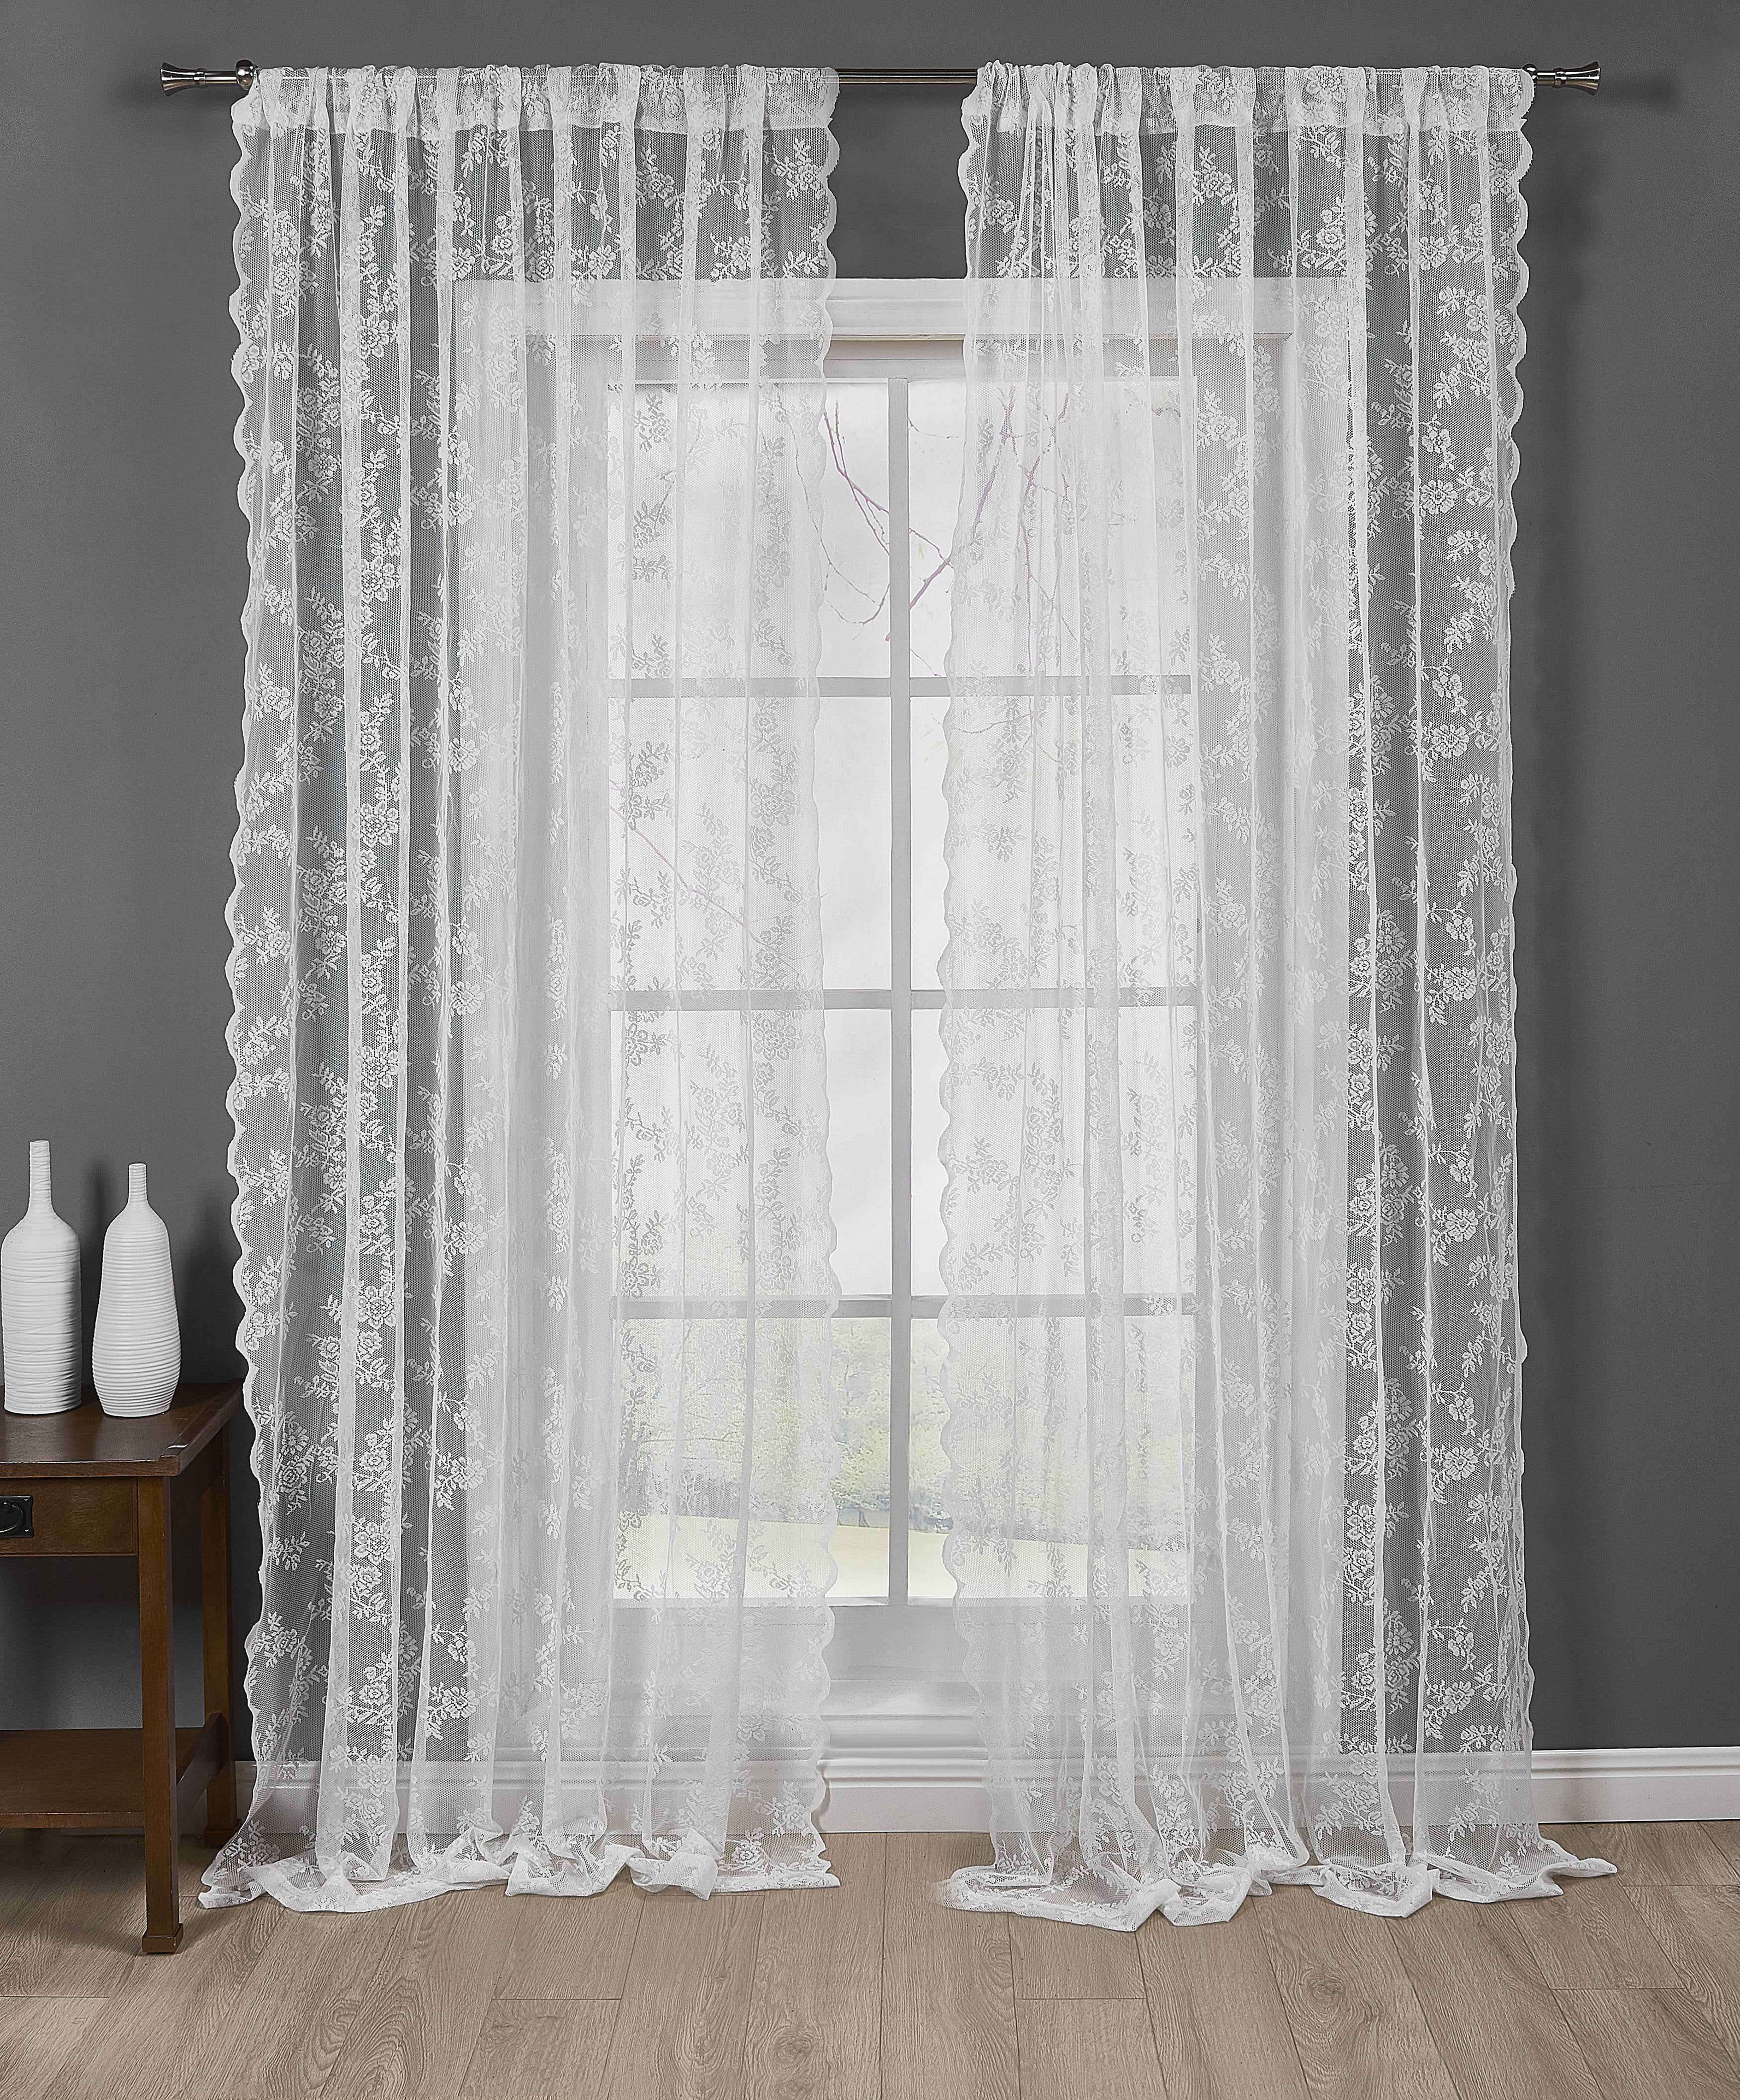 LOUVRE BLIND STYLE WHITE LACE CURTAINS CHEAP VALENCIA QUALITY GREAT VALUE 